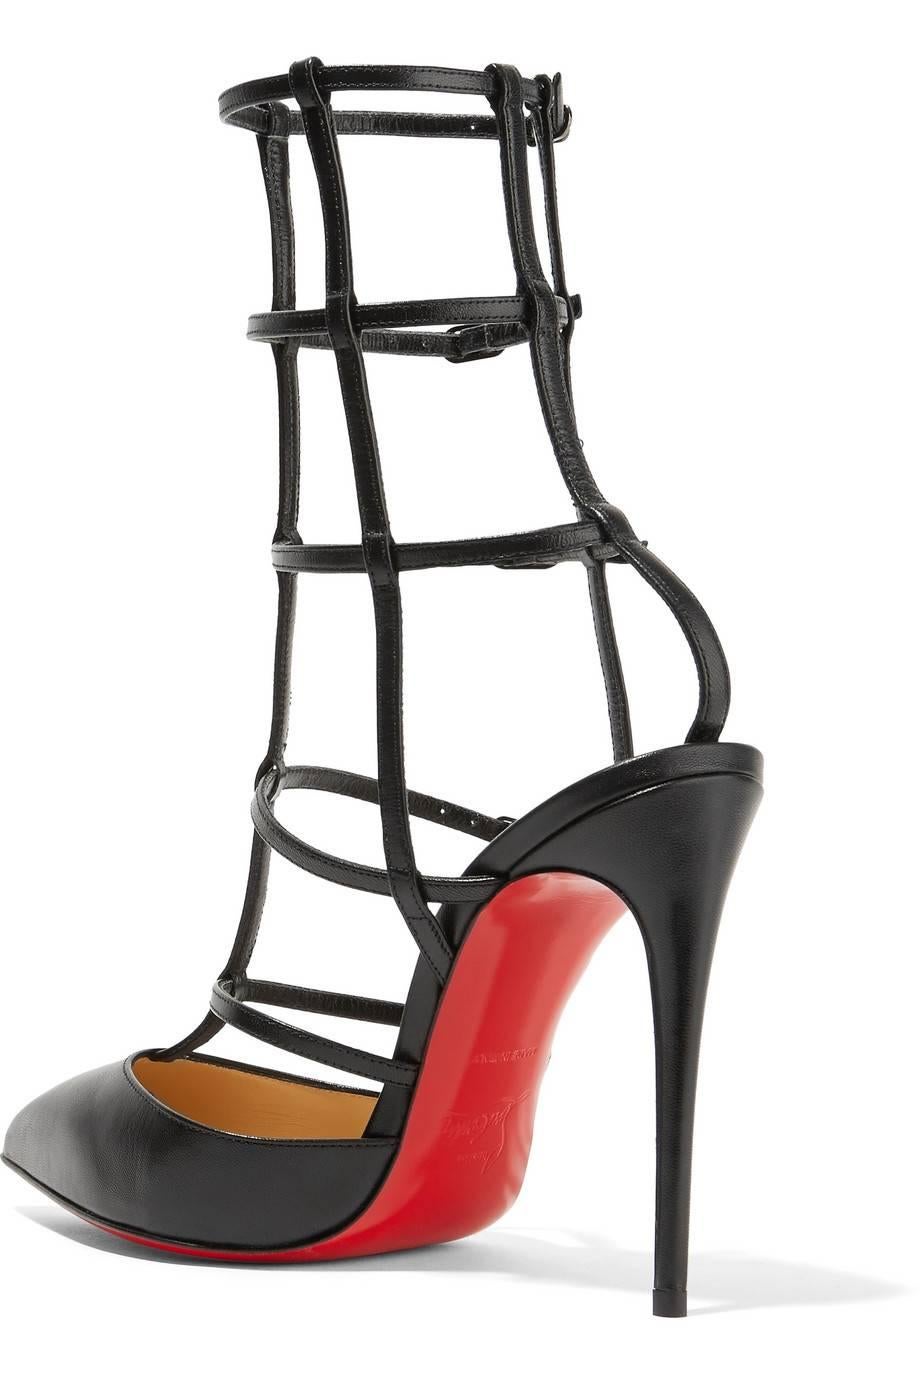 Christian Louboutin Black Leather Cage Evening Sandals Heels Pumps in Box 1